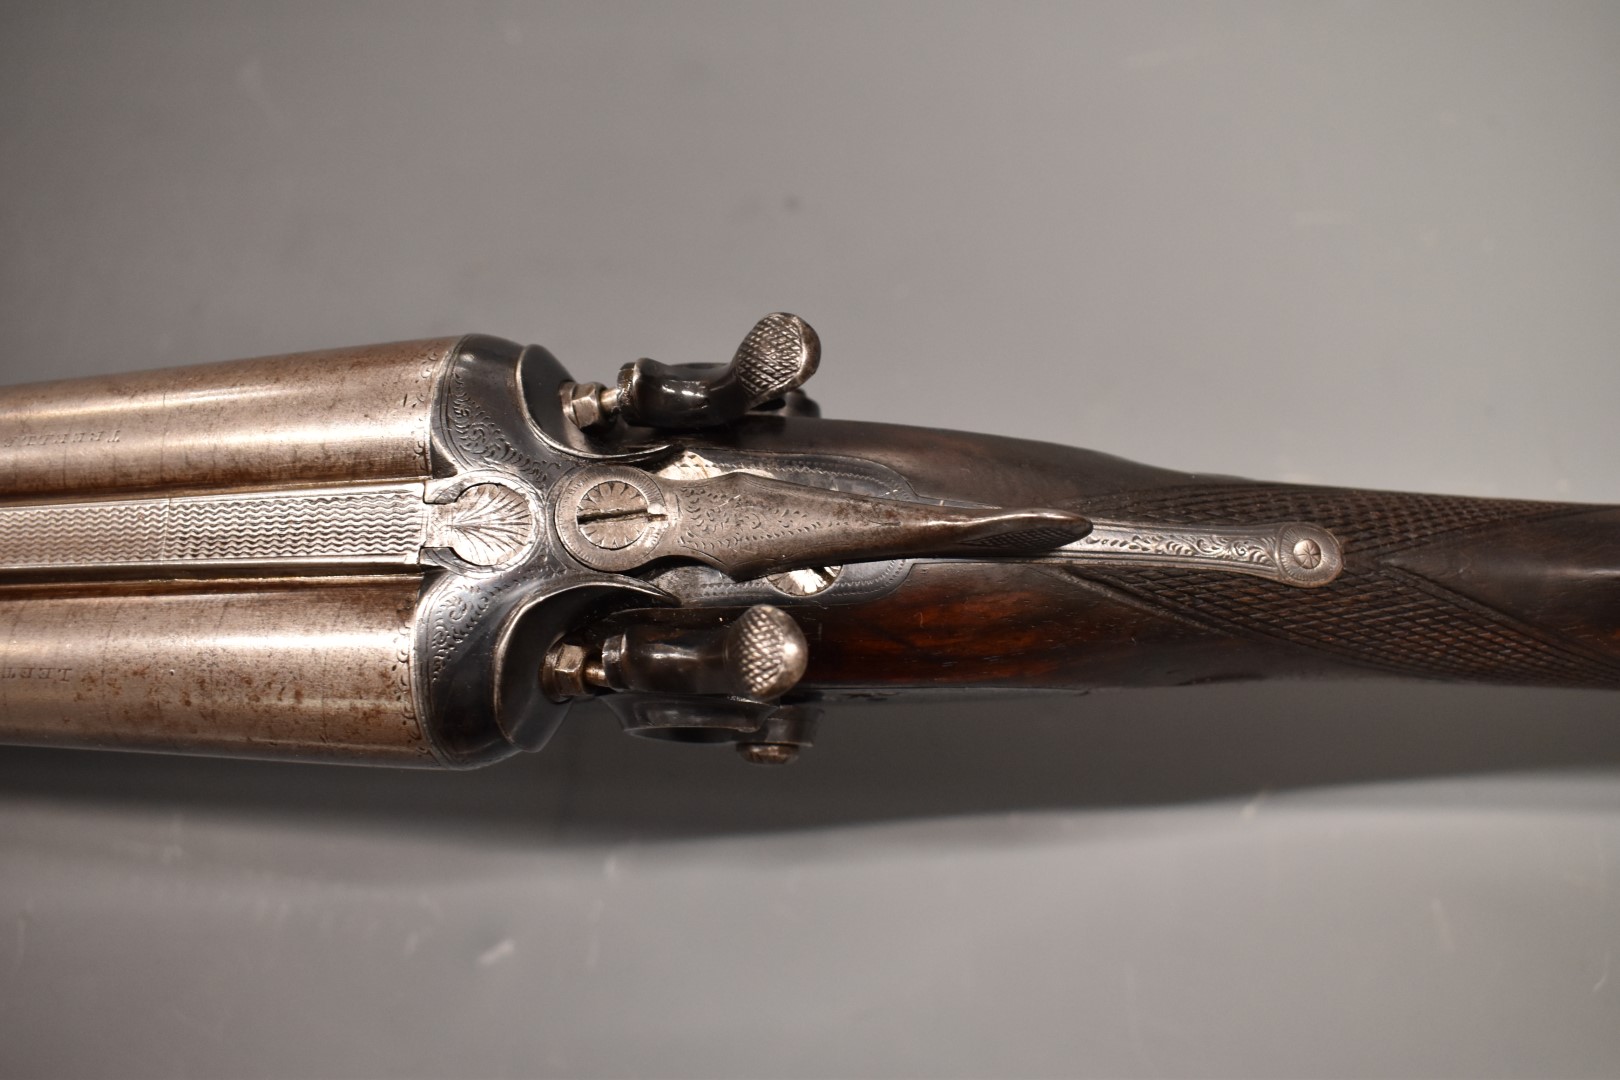 English 12 bore side by side hammer action shotgun with engraved locks, stylised hammers, trigger - Image 11 of 11